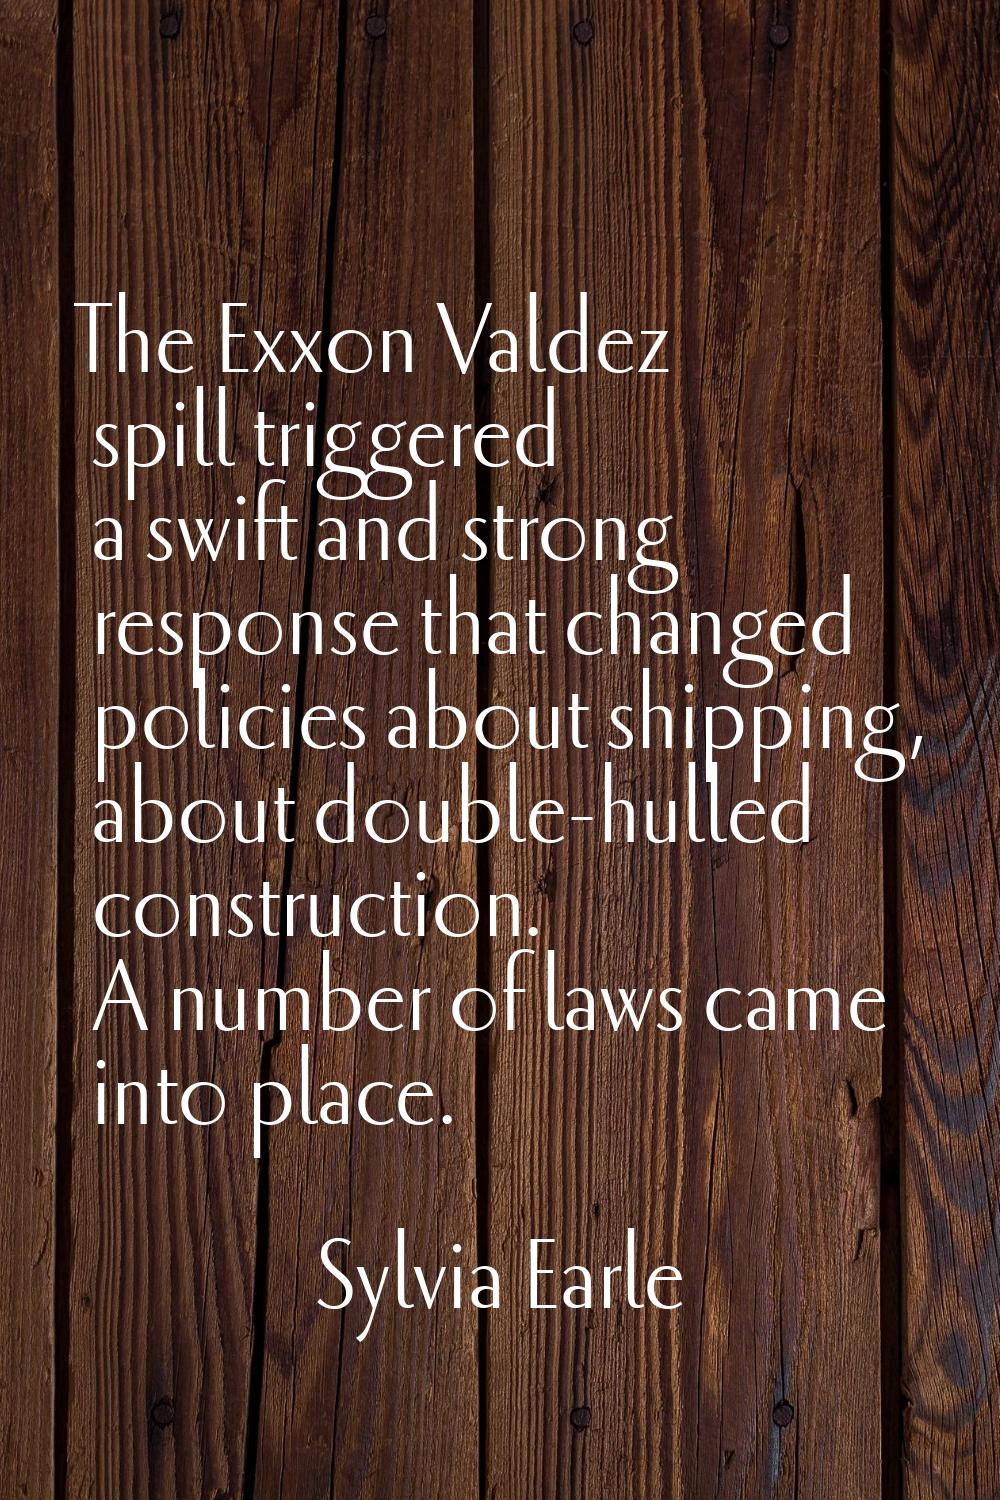 The Exxon Valdez spill triggered a swift and strong response that changed policies about shipping, 